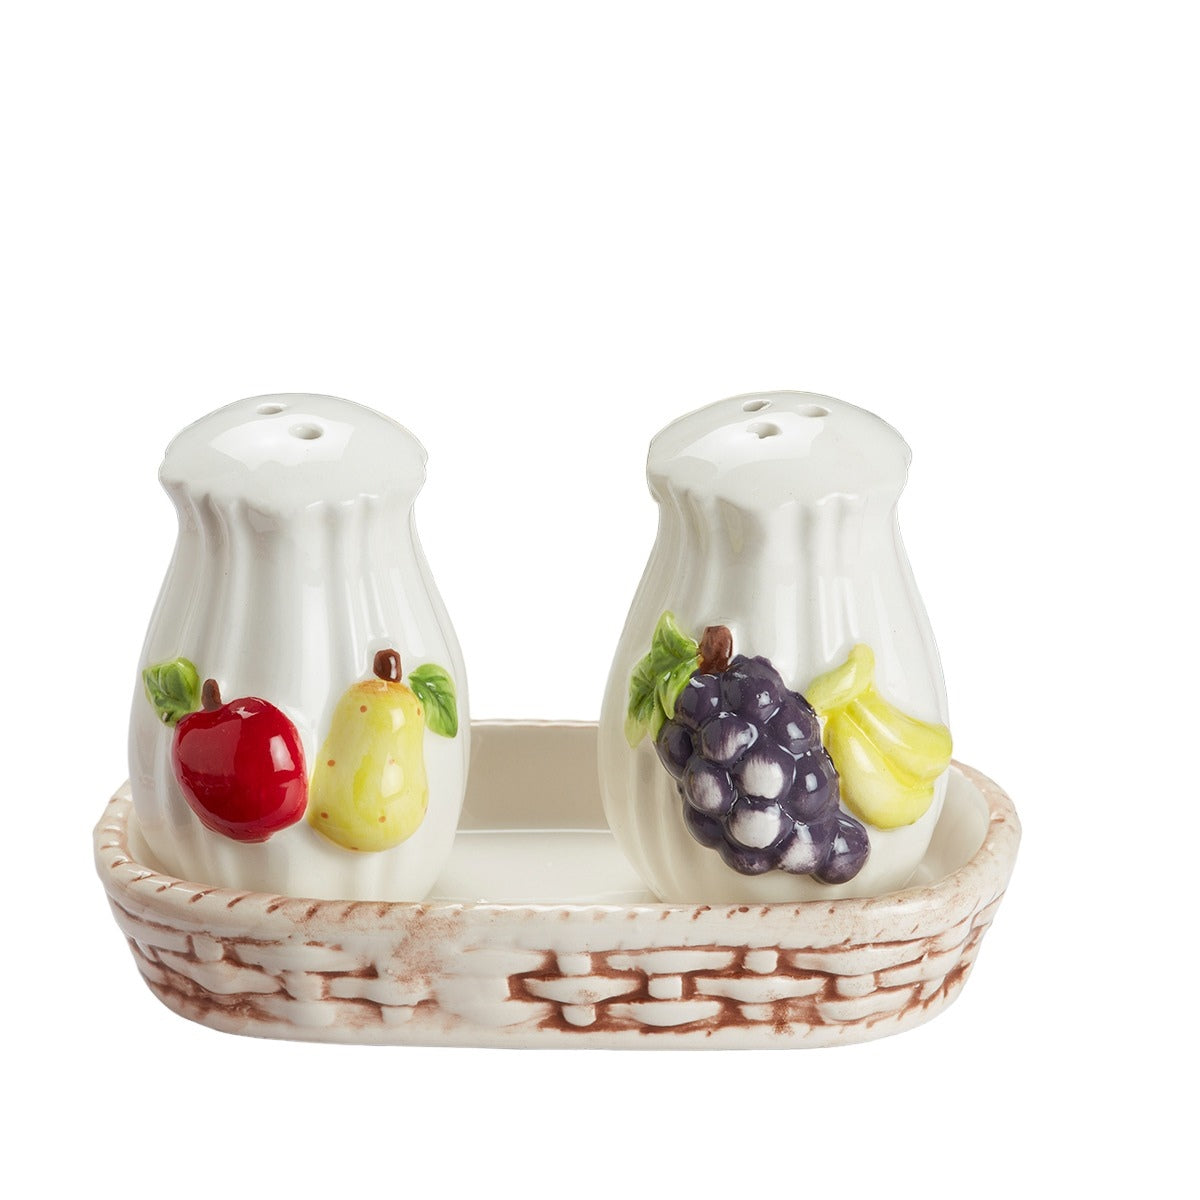 Ceramic Salt and Pepper Set with tray, Fruits Design, White